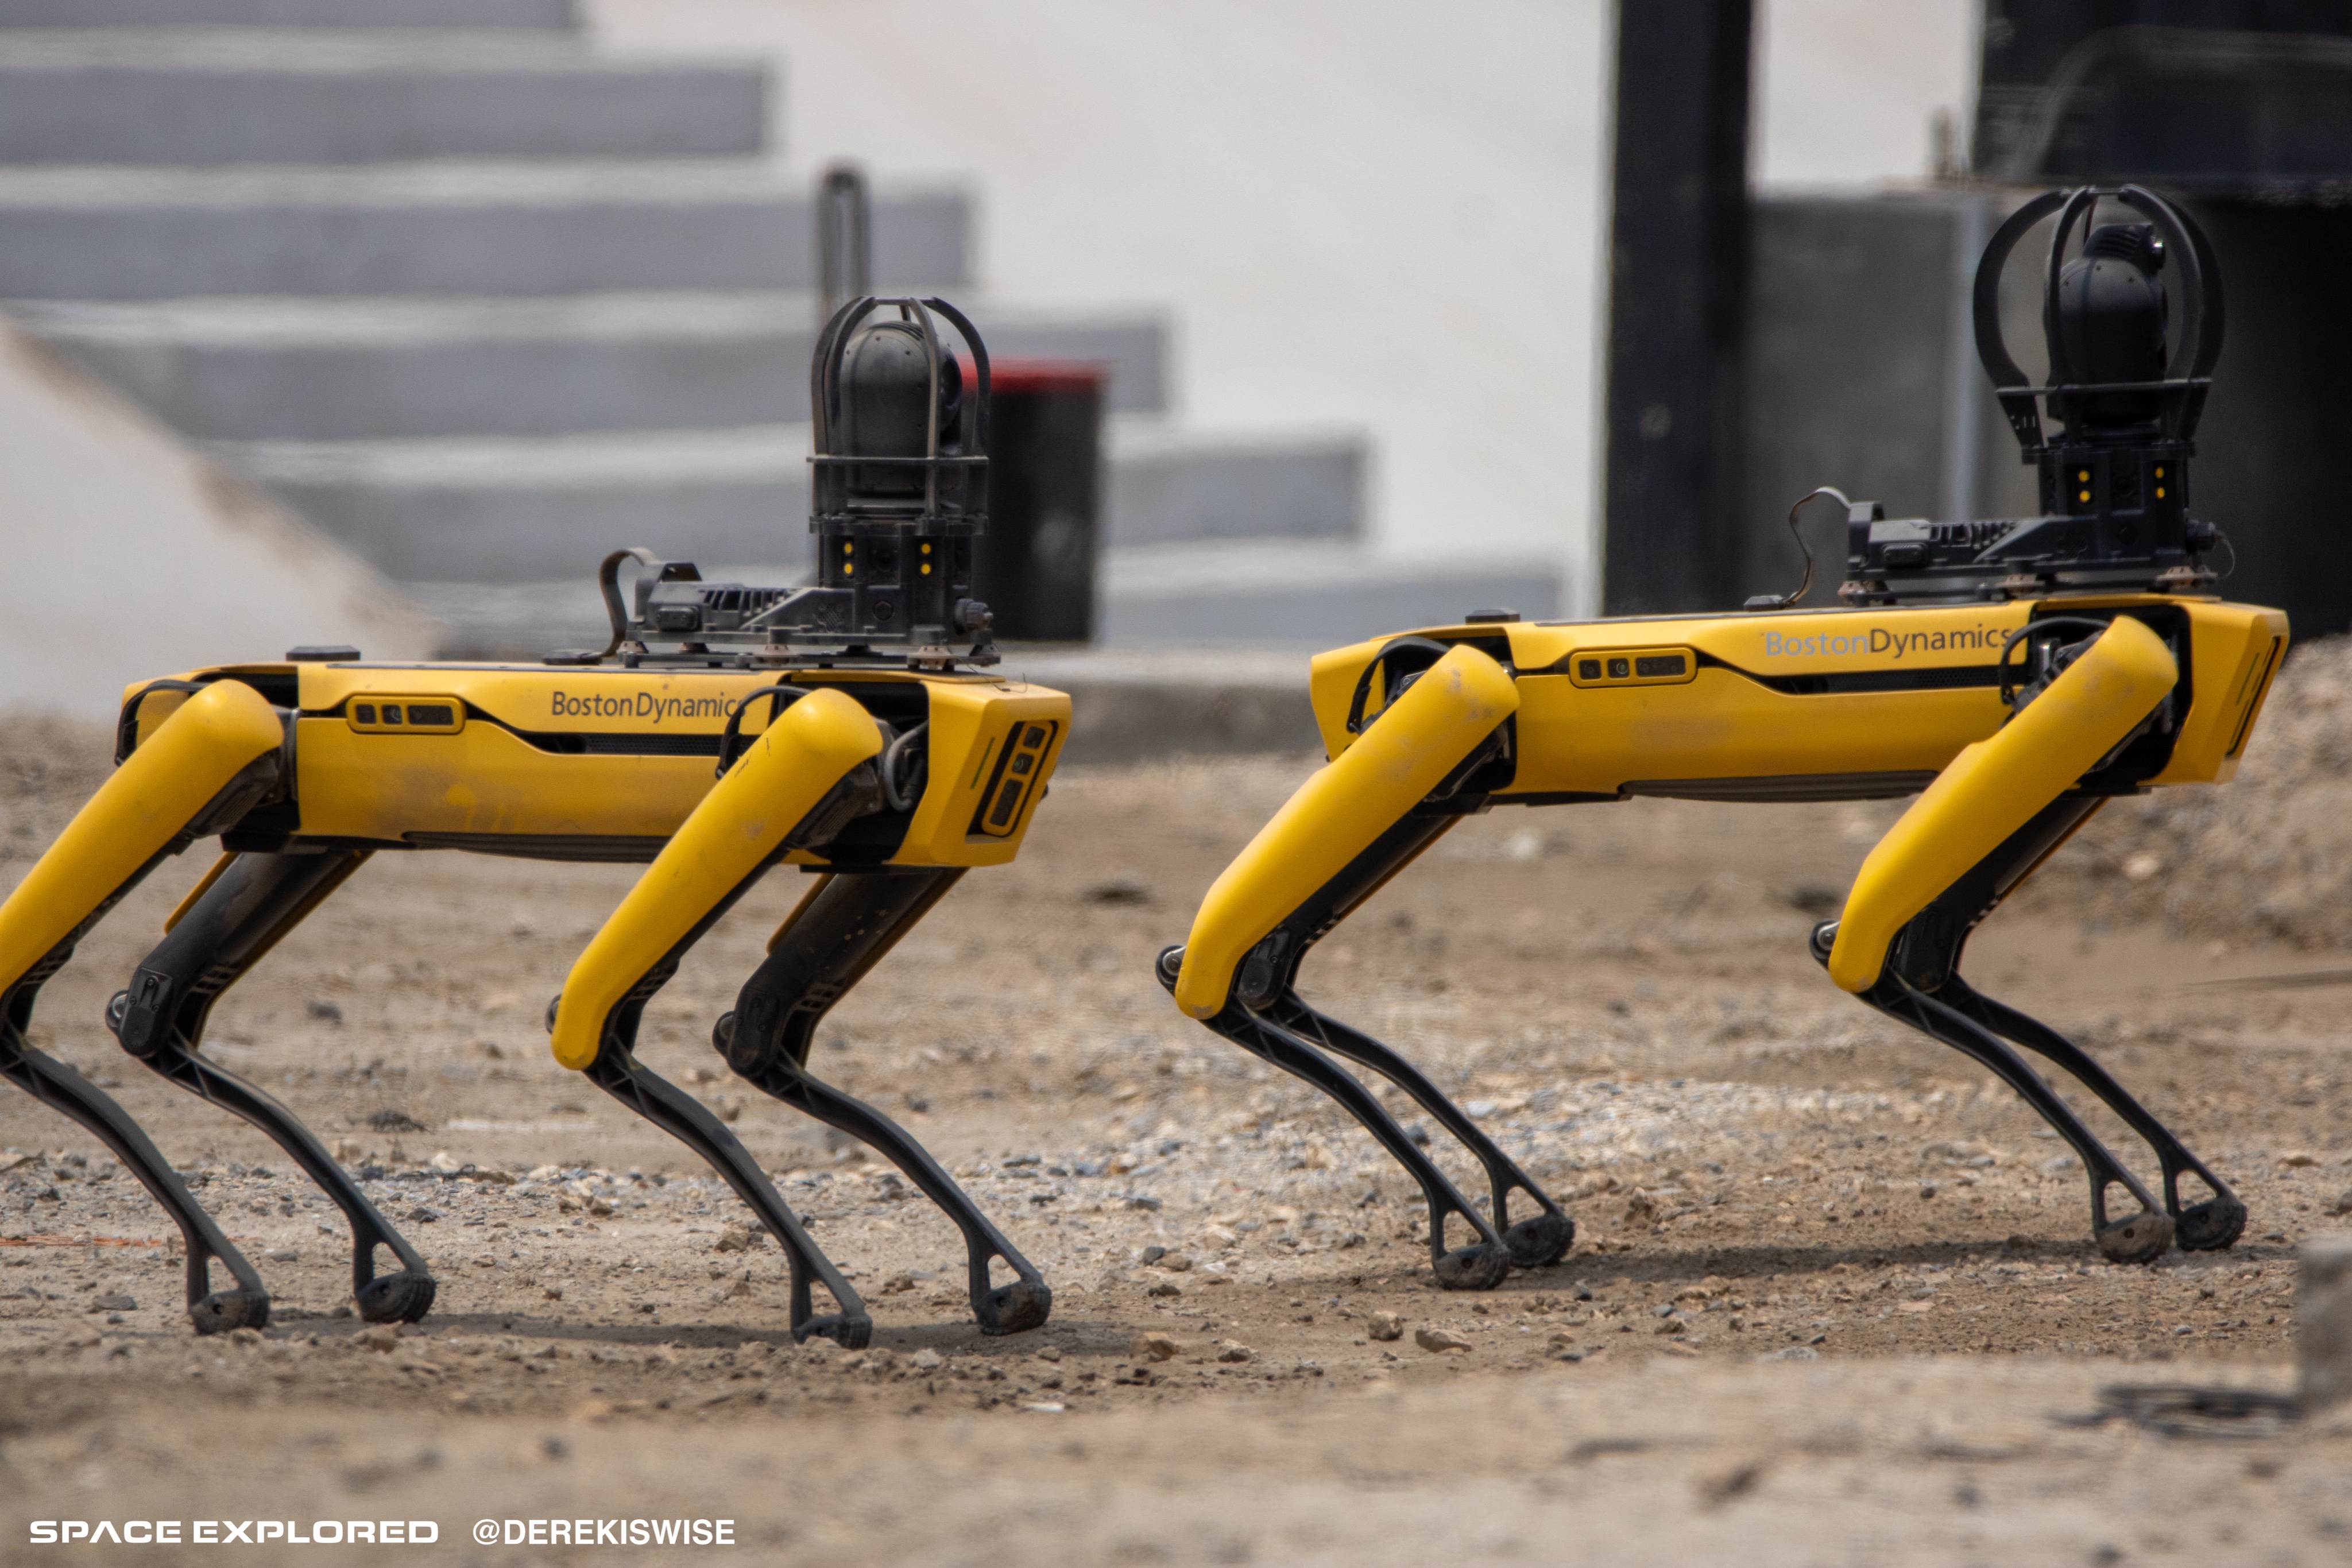 Boston Dynamics Spot robots at spaceX facility in Texas